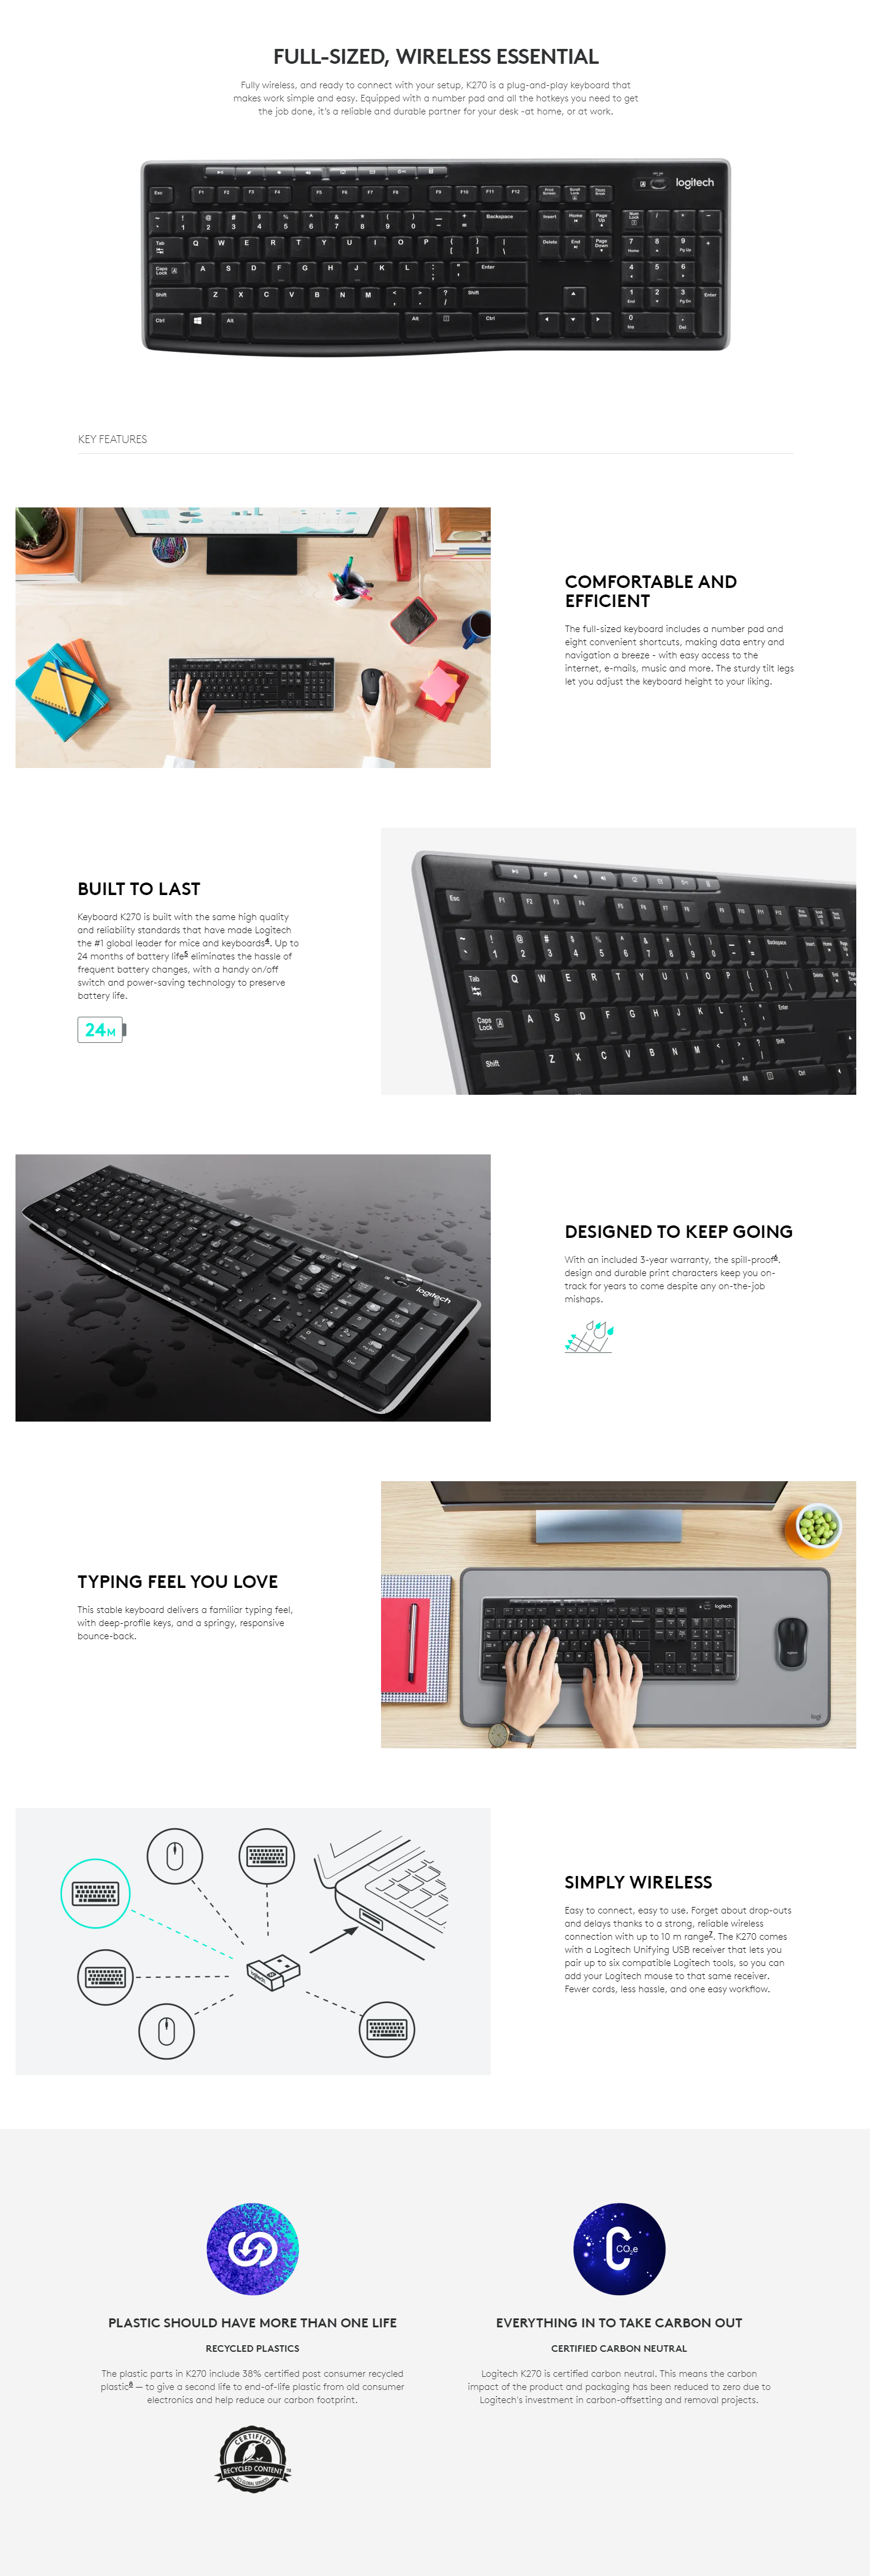 A large marketing image providing additional information about the product Logitech K270 Wireless Keyboard - Additional alt info not provided